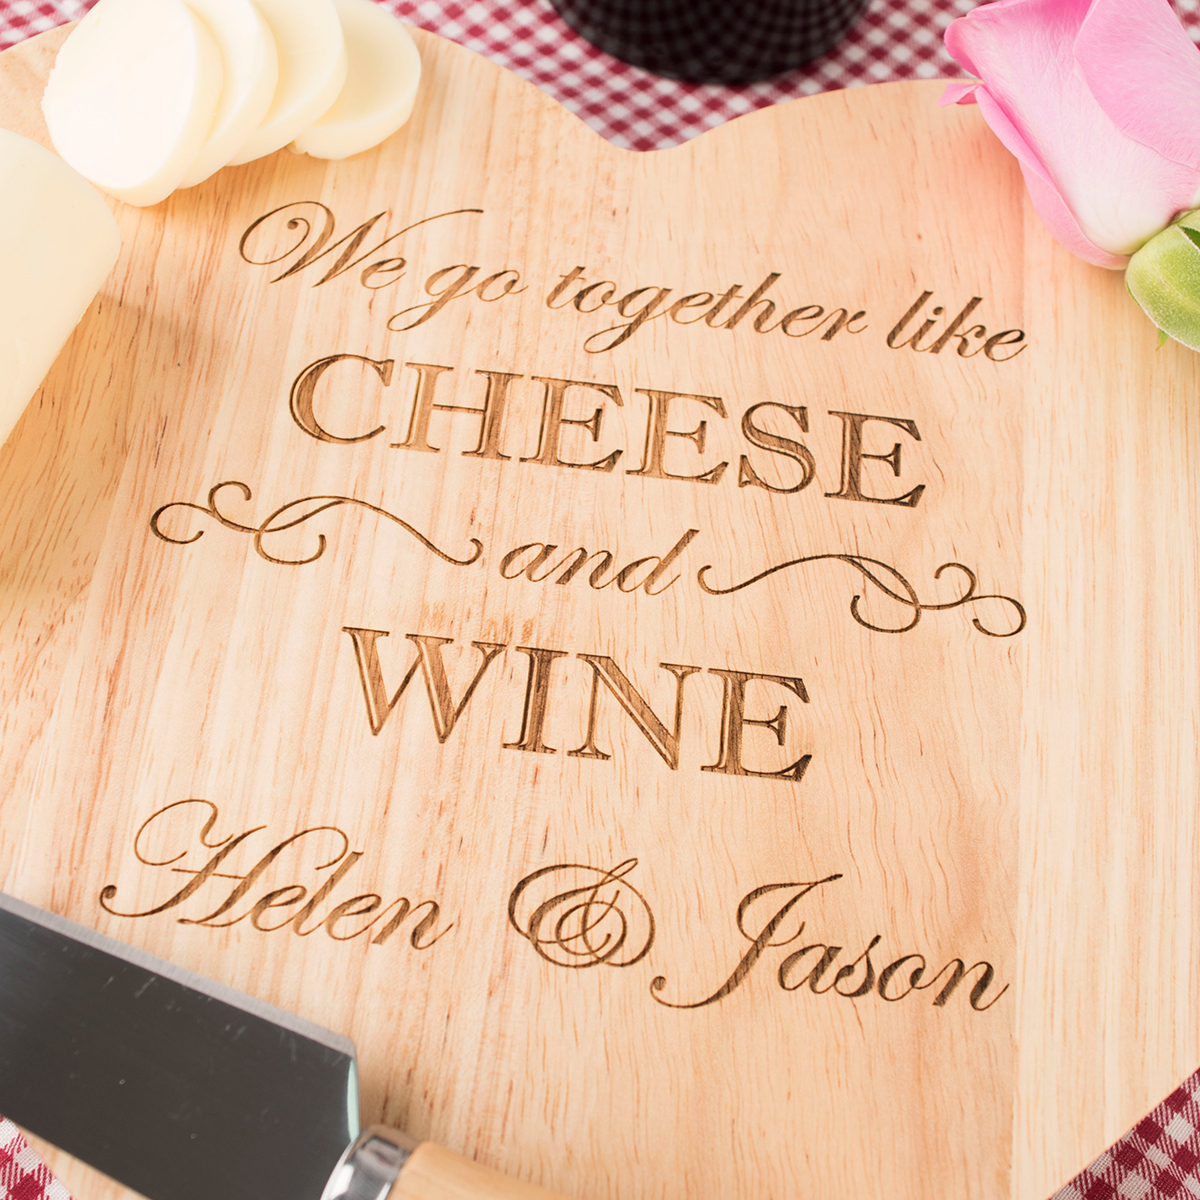 Personalised Engraved Heart-Shaped Wooden Cheeseboard Set - Like Cheese & Wine